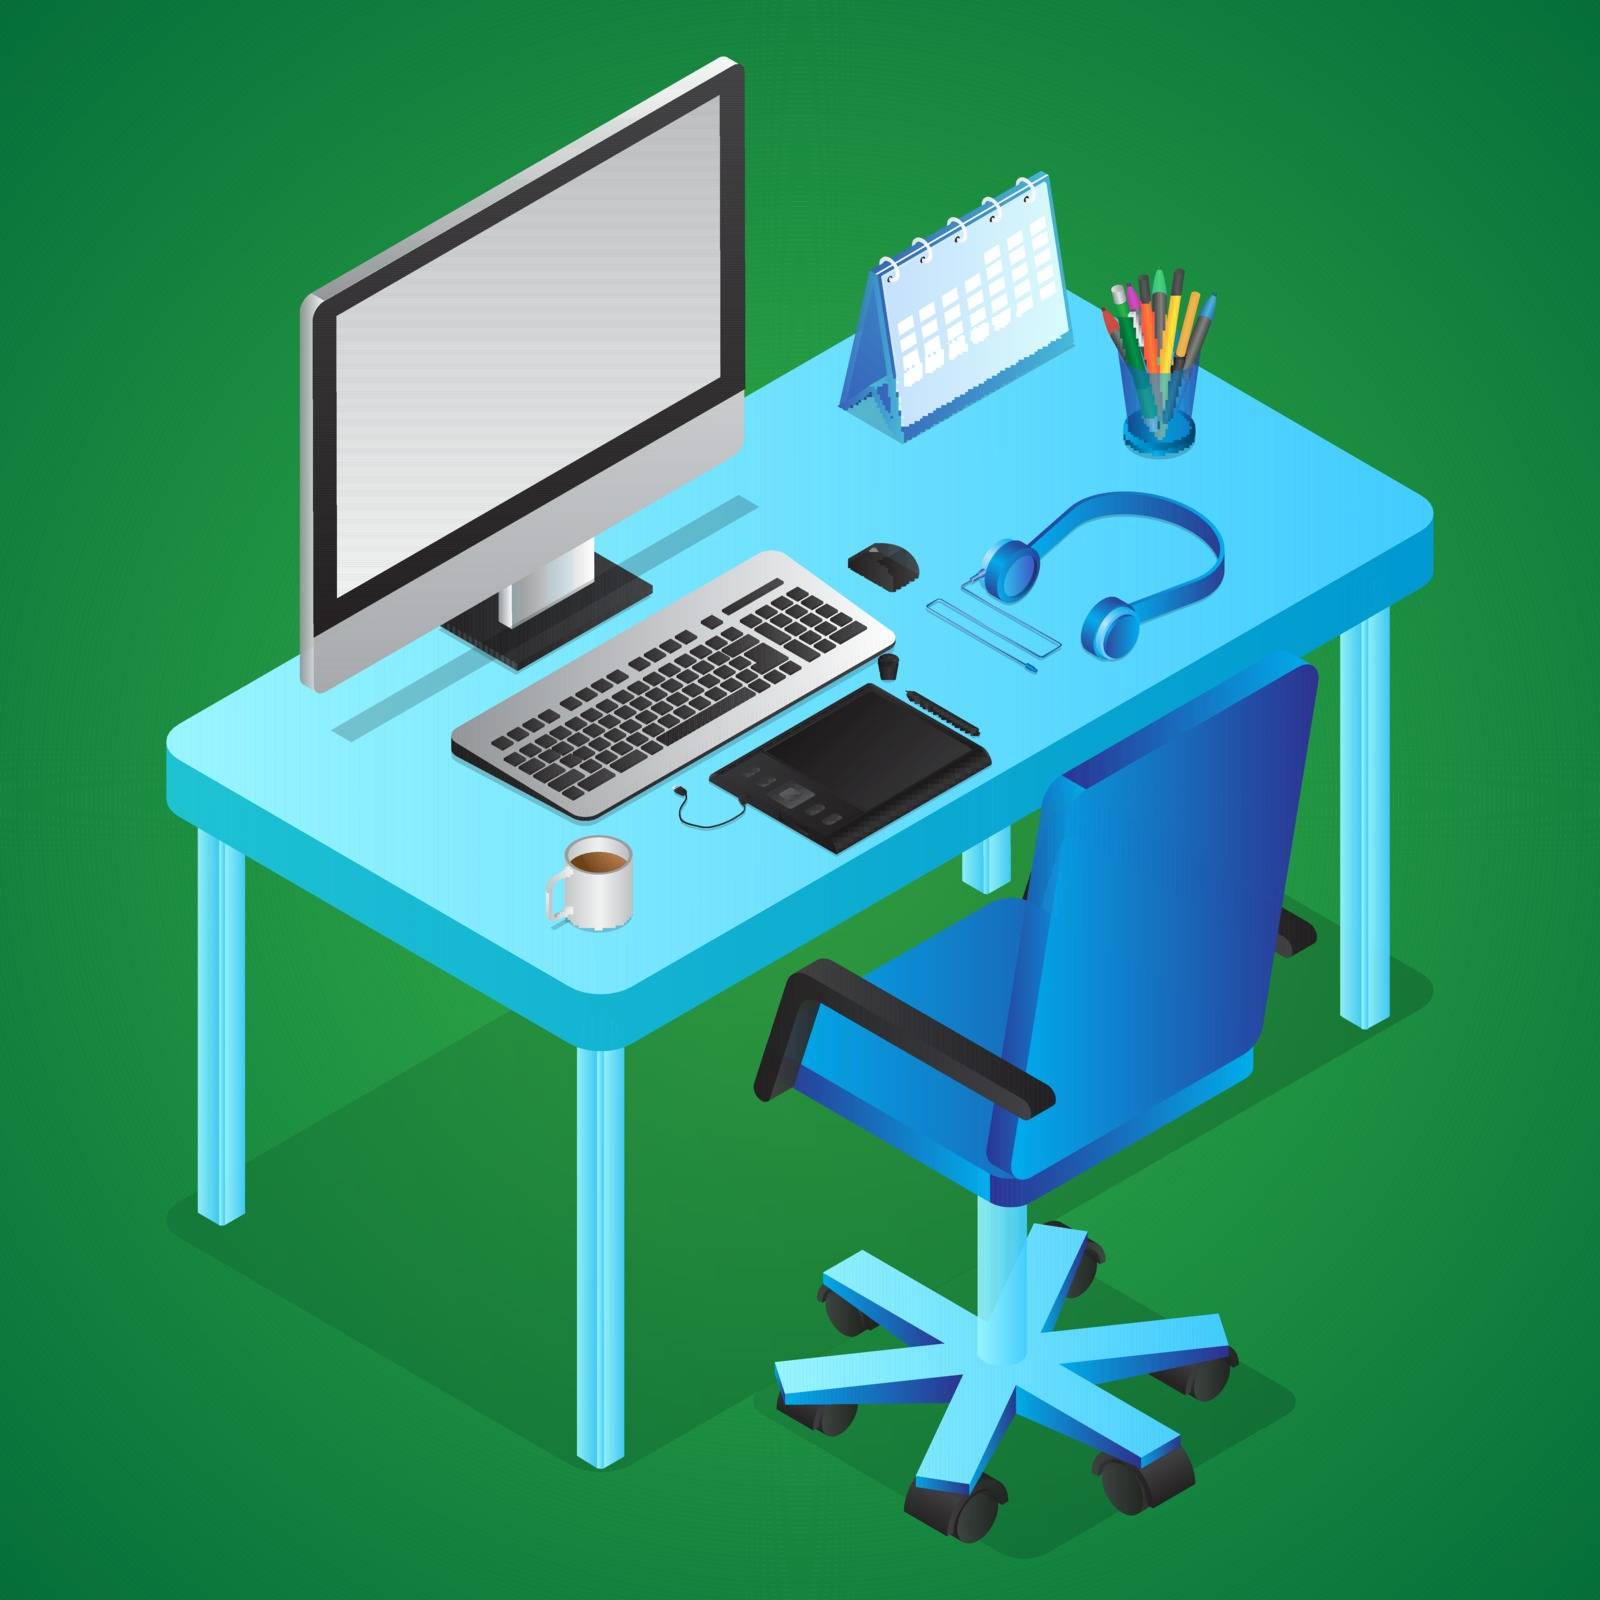 3D Workplace view of Graphic designer objects like as computer, graphic tablet, calendar, headphone and pen holder on blue desk with chair.